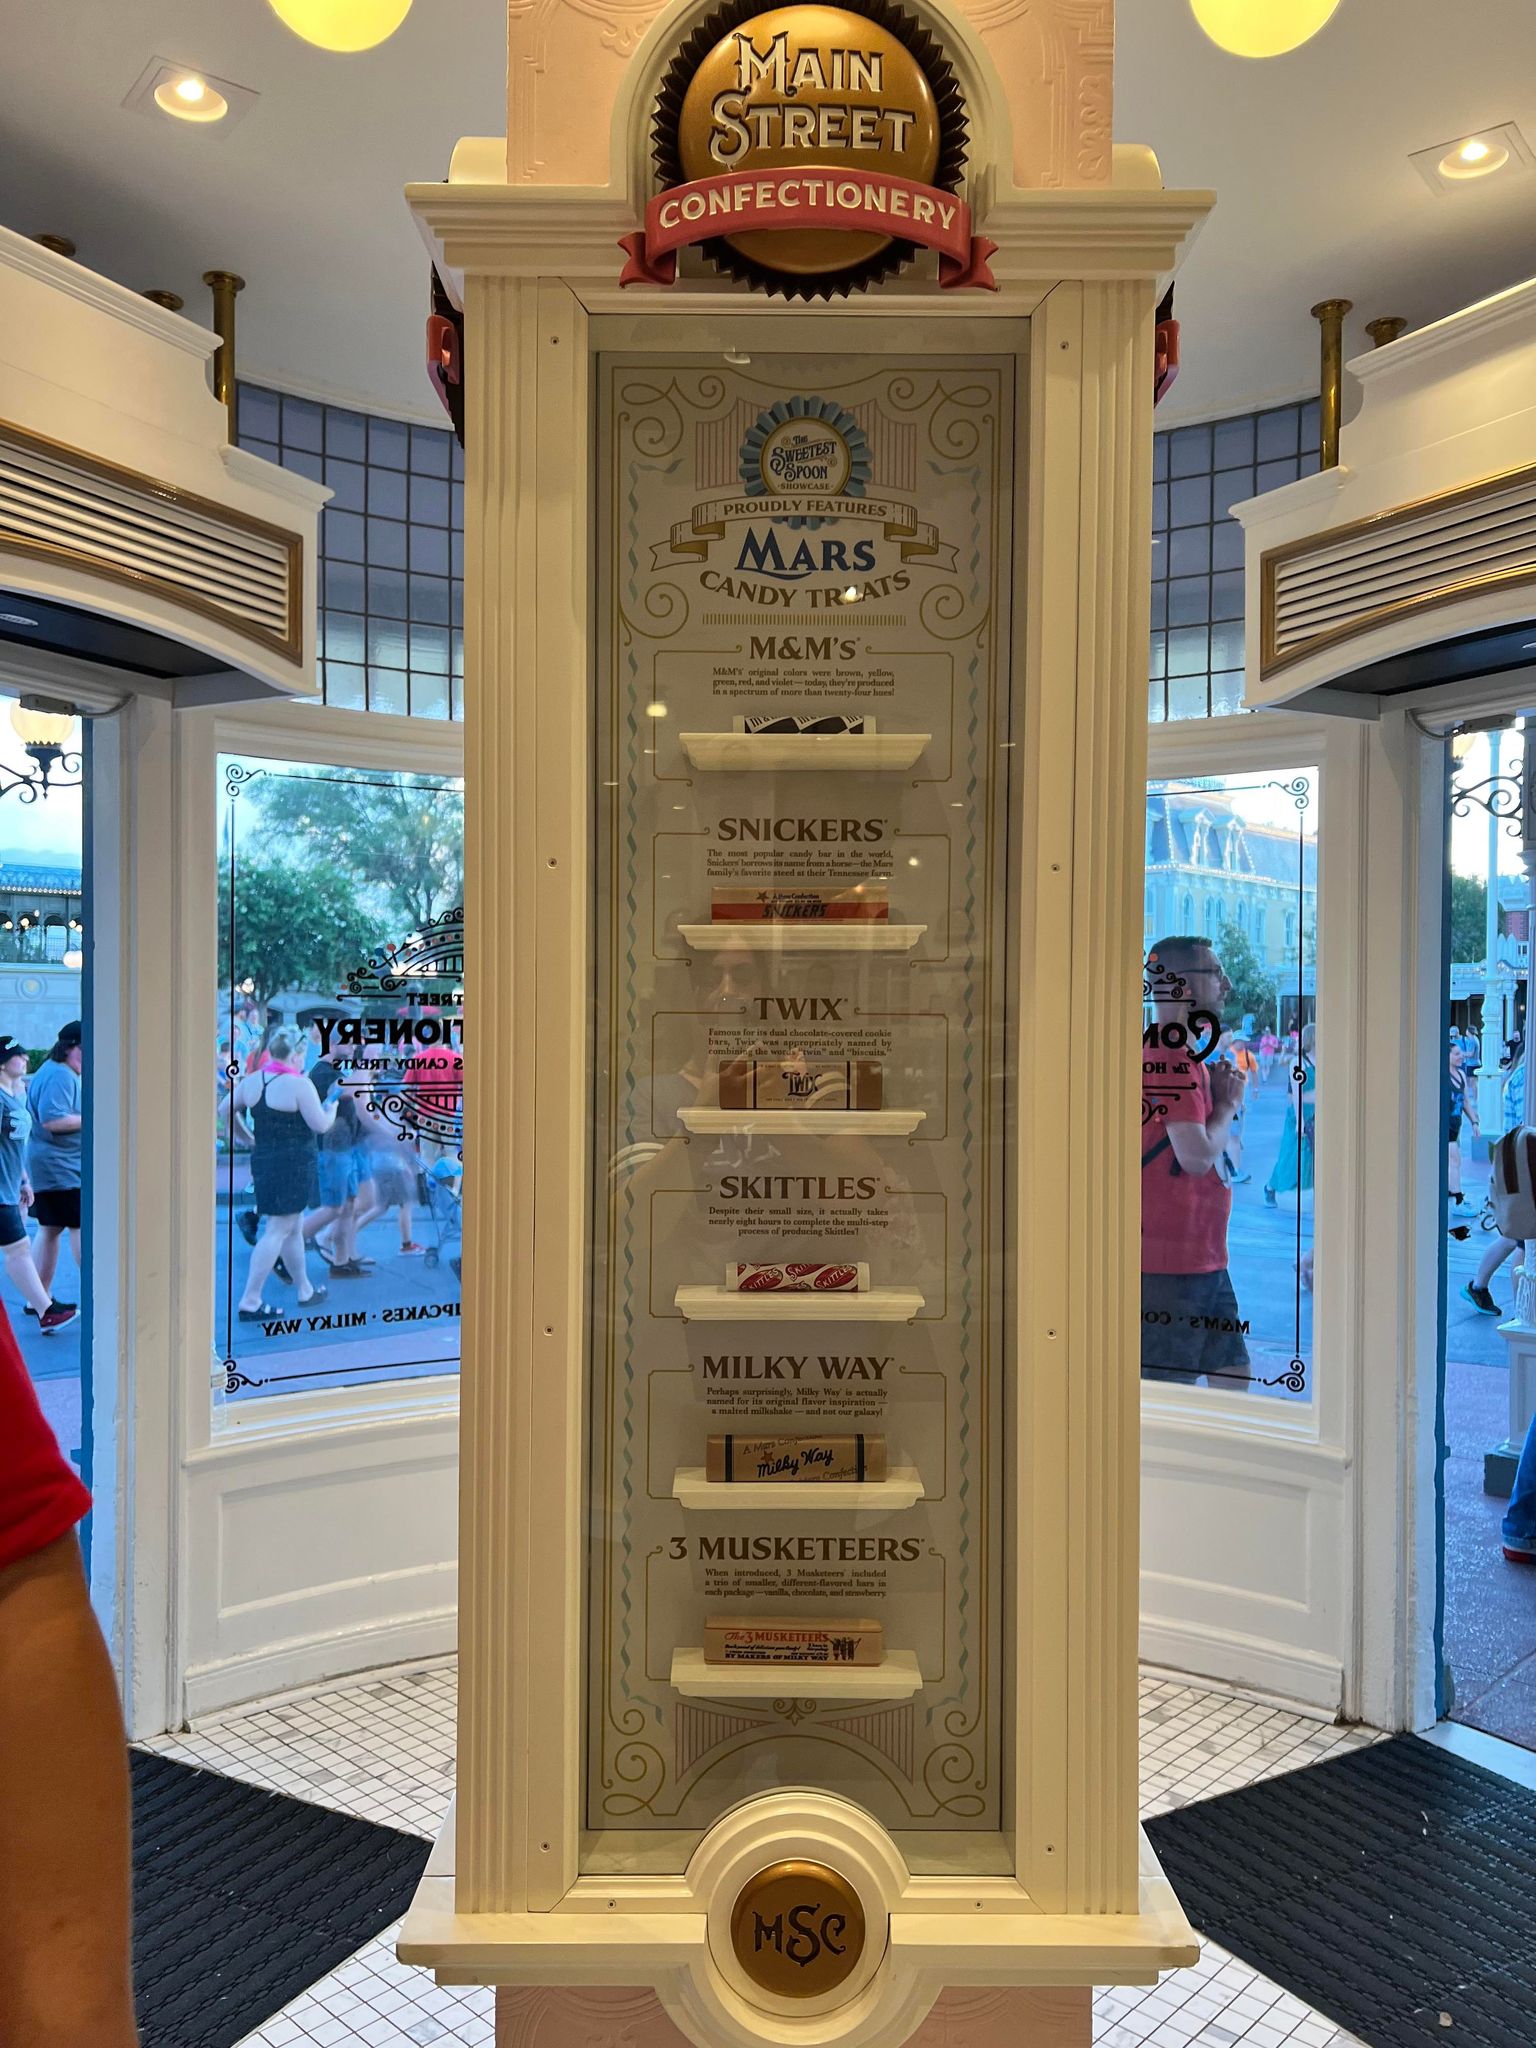 See What's Cooking In the Beautifully Remodeled Main Street Confectionary Magic Kingdom 4